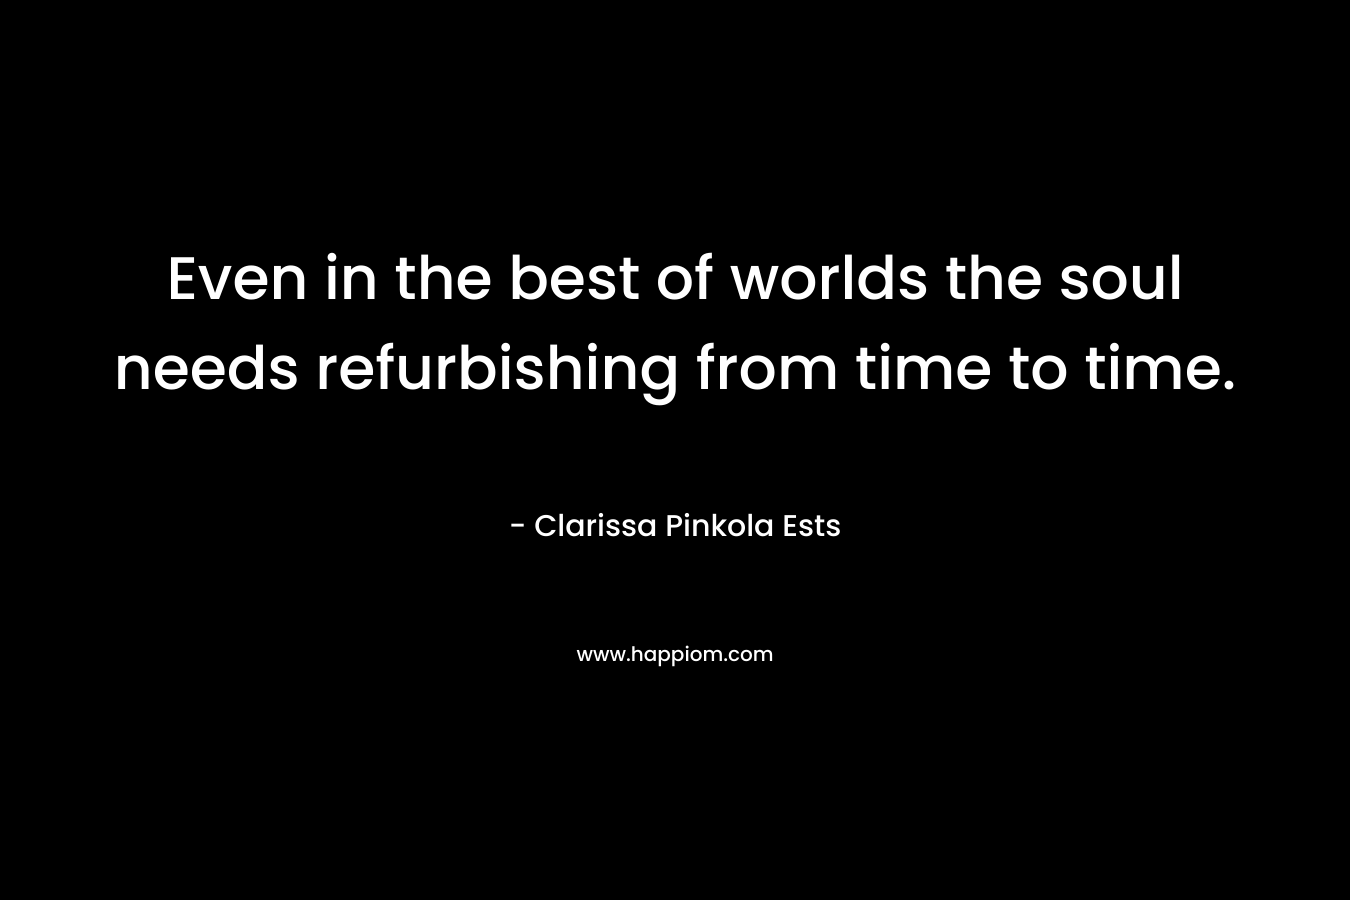 Even in the best of worlds the soul needs refurbishing from time to time.